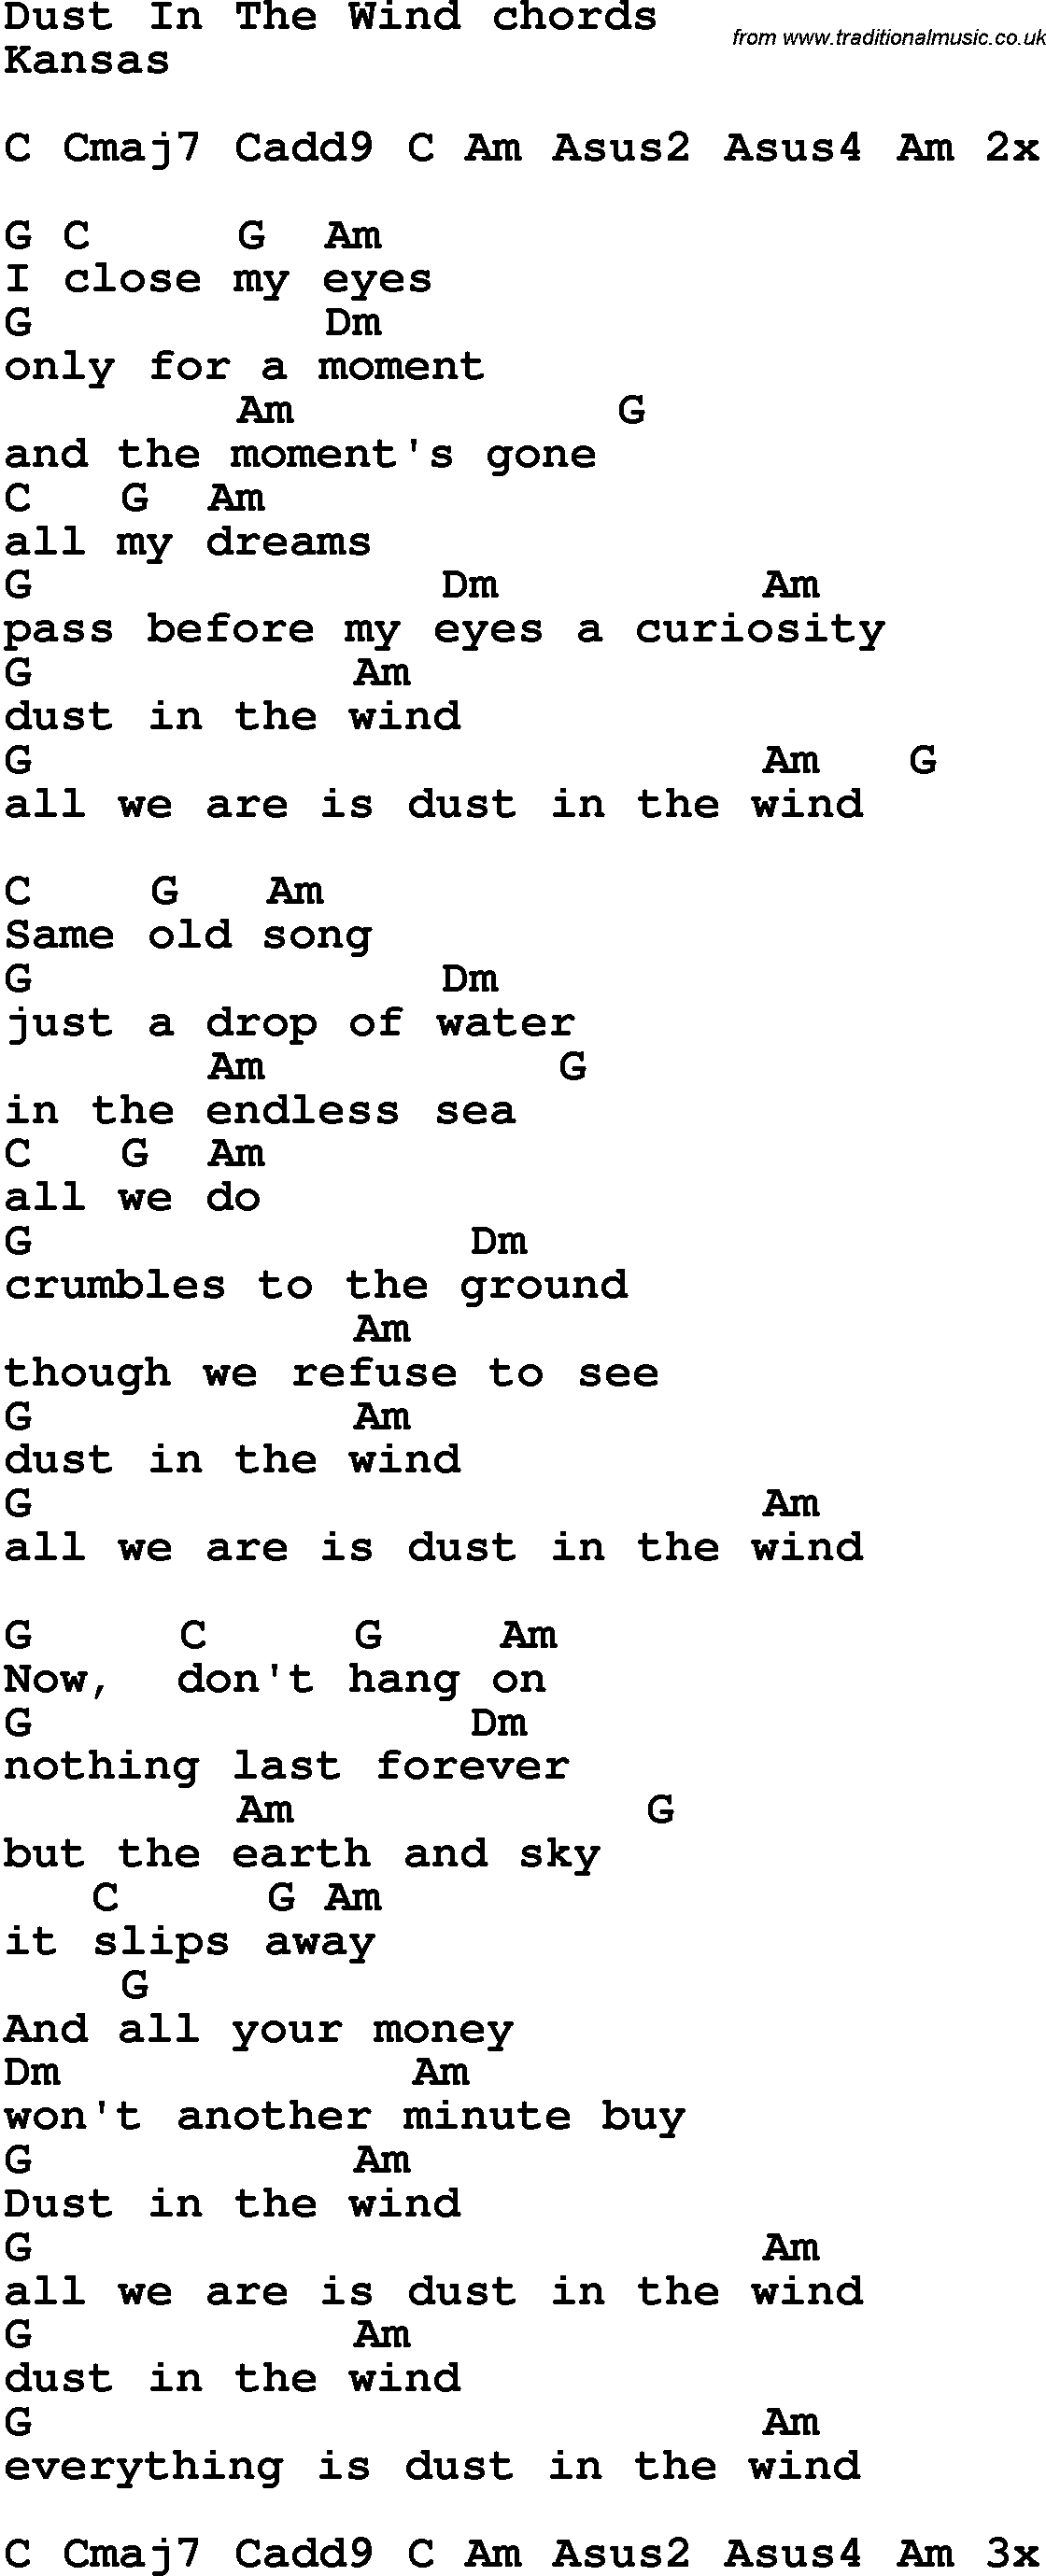 chords of dust in the wind